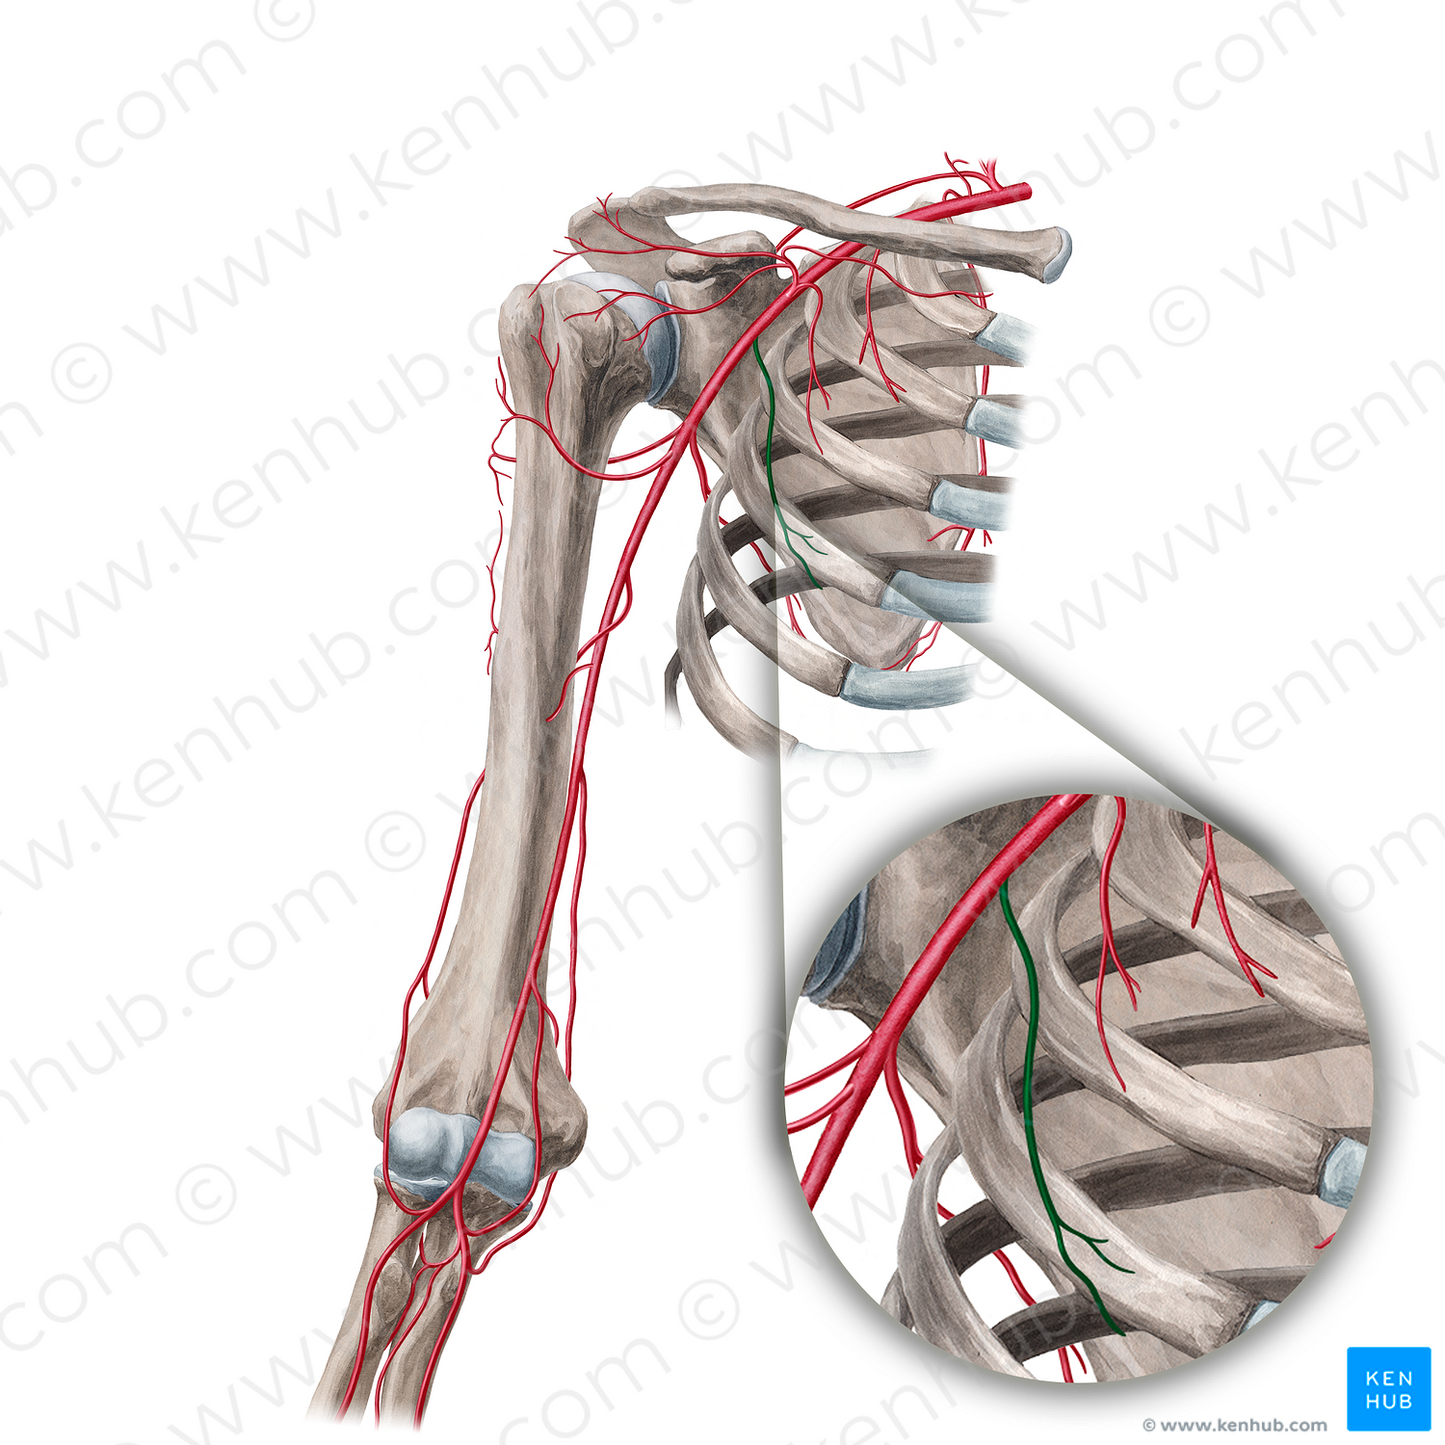 Lateral thoracic artery (#18850)